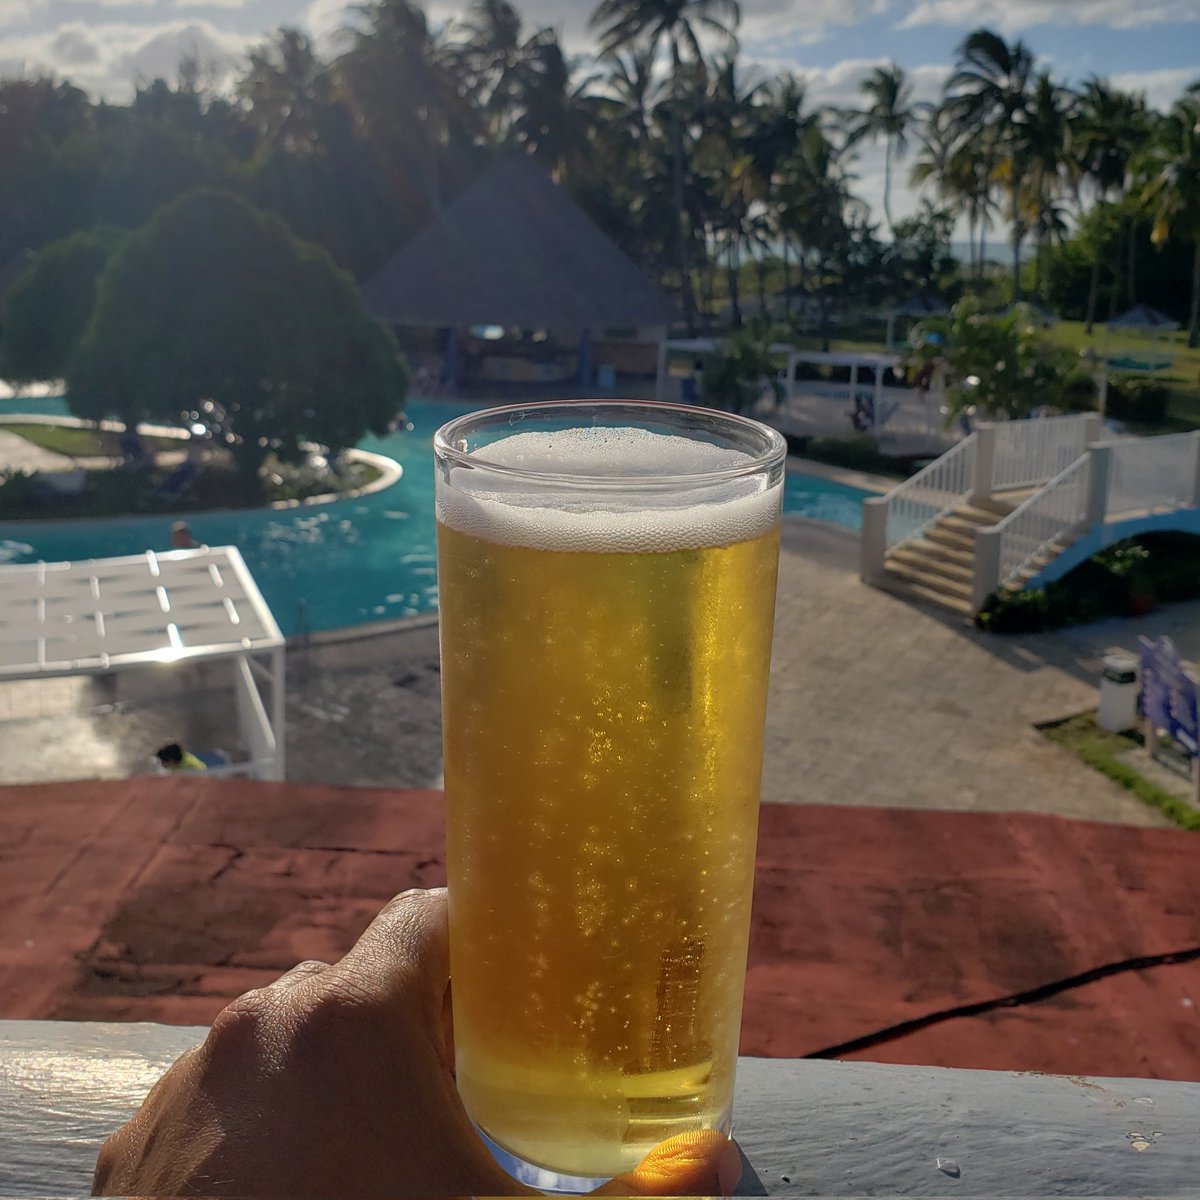 The best vacations start with a beer and a view like this.
#BrisasDelCaribe 
#CubaUnica 
#VaraderoTravel